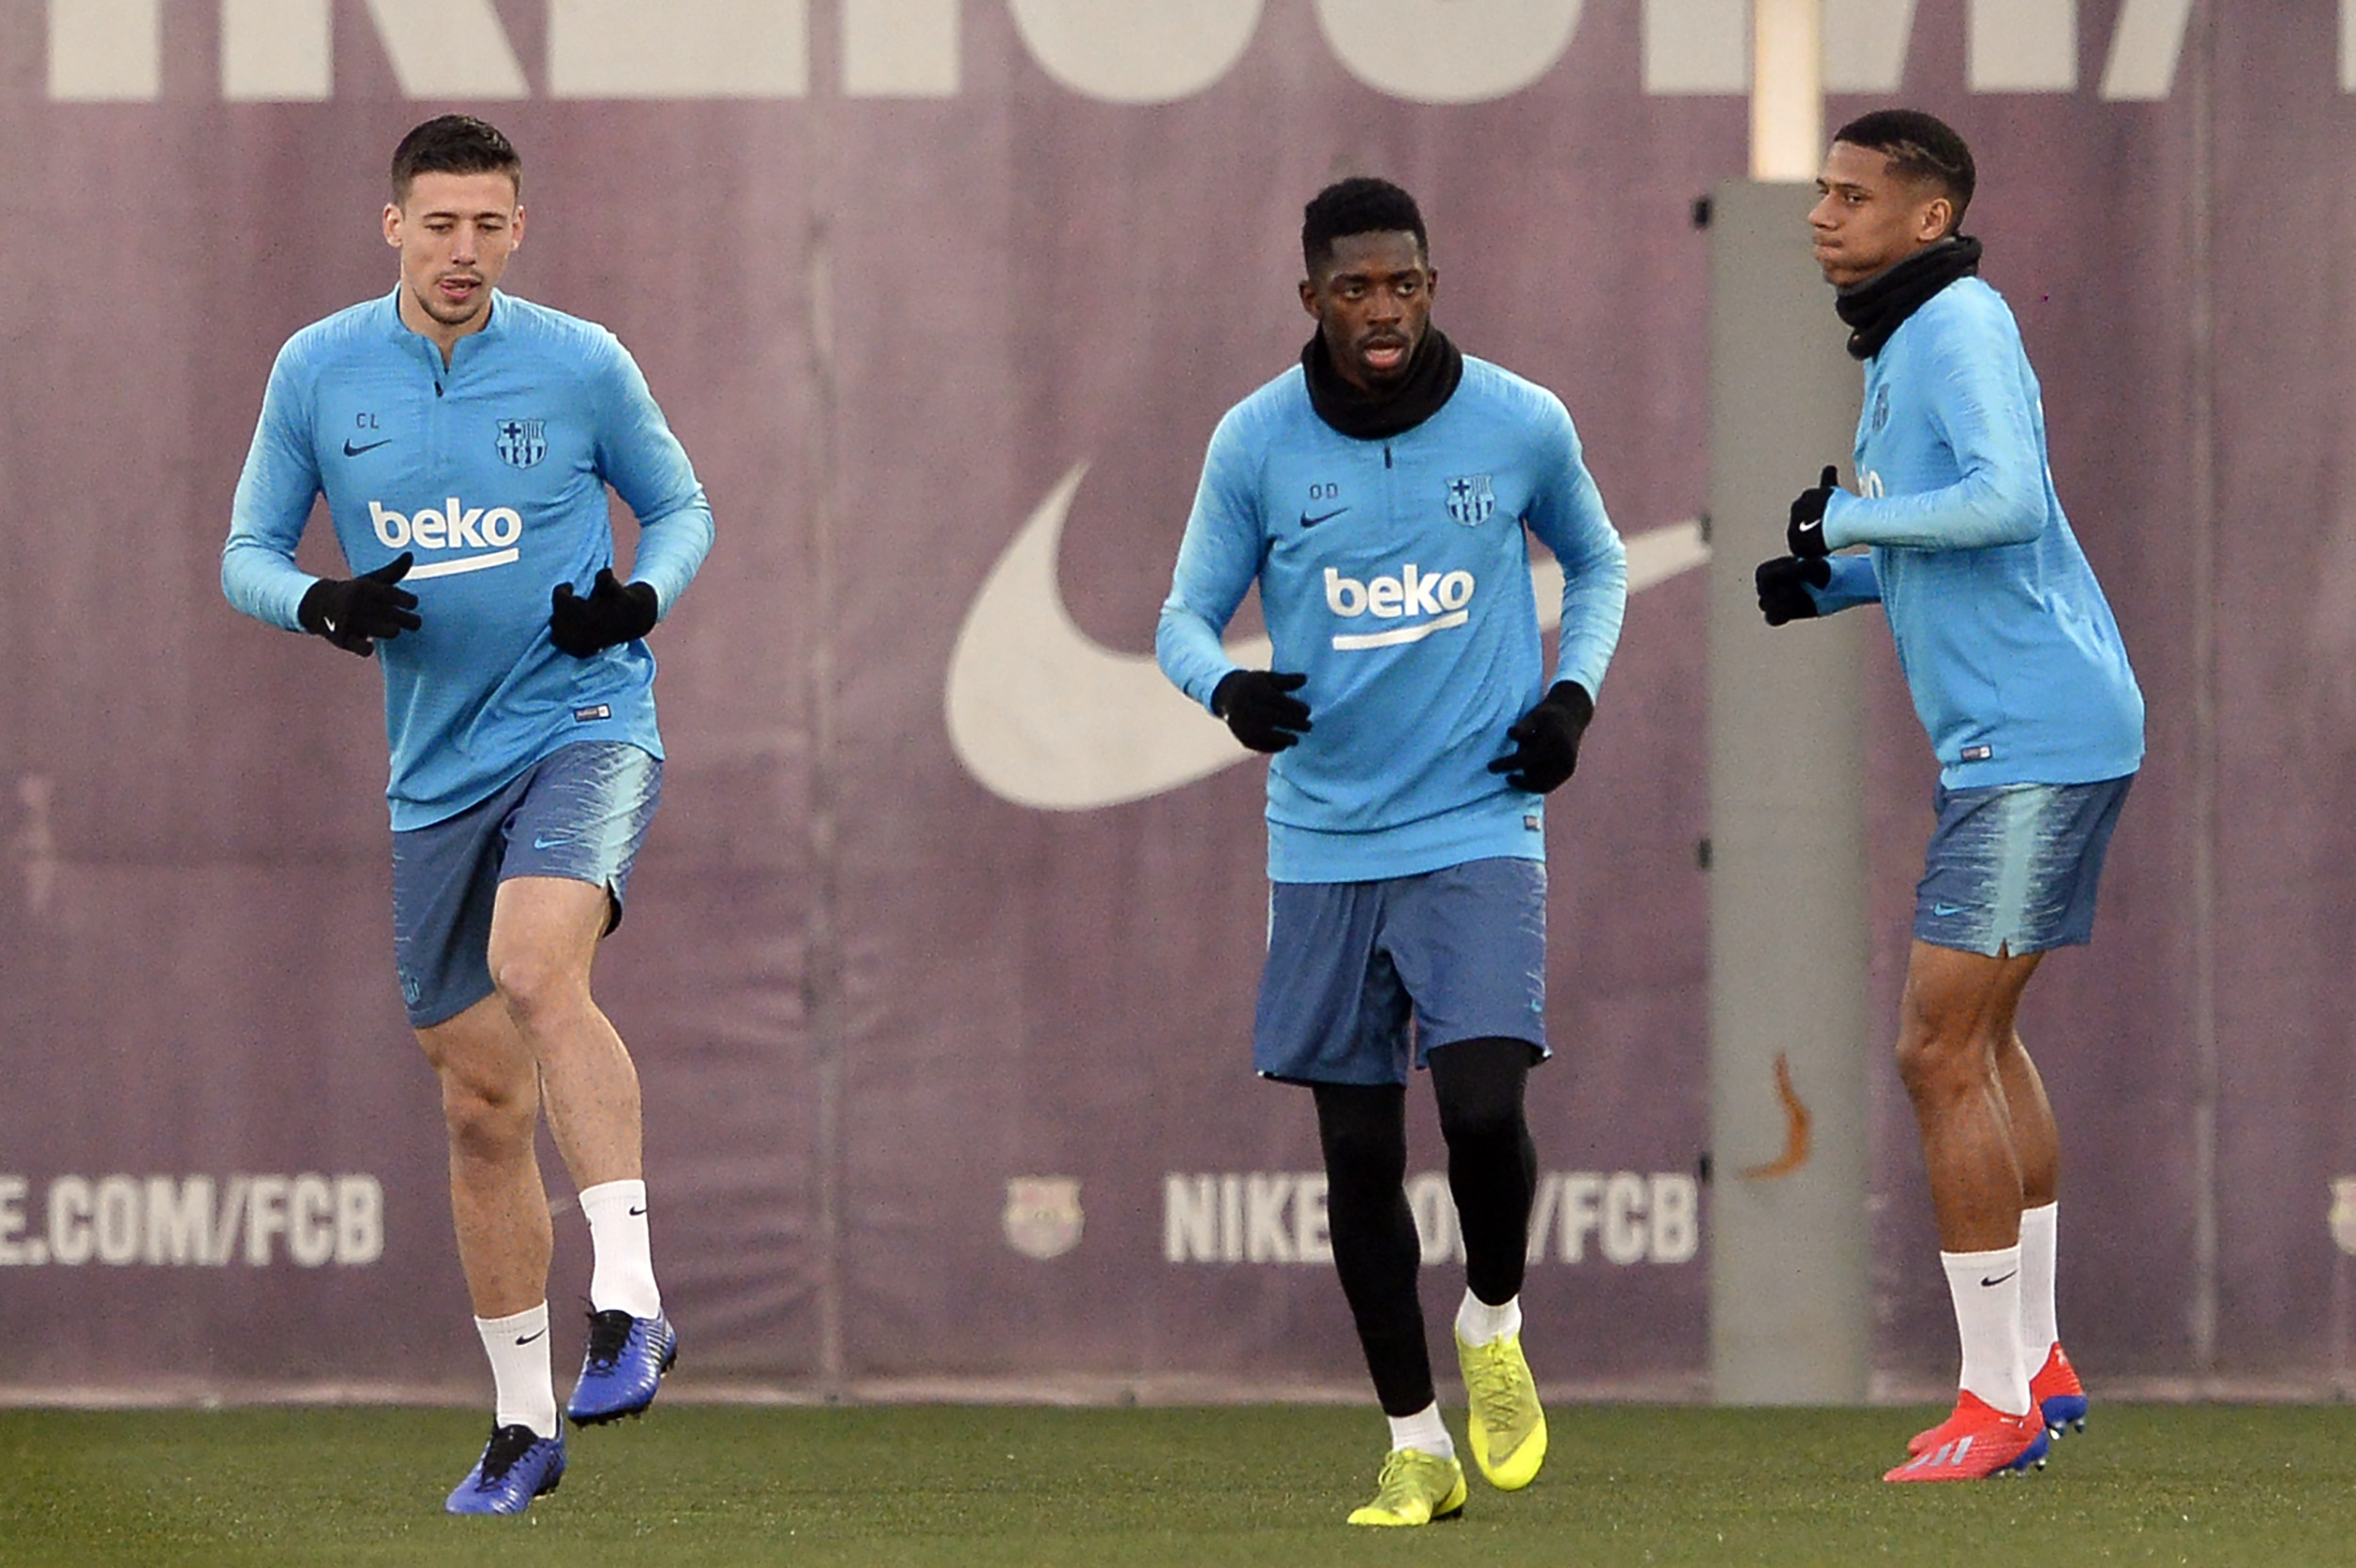 Barcelona's French defender Clement Lenglet (L), Barcelona's French forward Ousmane Dembele (C) and Barcelona's French defender Jean-Clair Todibo attend a training session at the Joan Gamper Sports Center in Sant Joan Despi on February 5, 2019. (Photo by Josep LAGO / AFP)        (Photo credit should read JOSEP LAGO/AFP/Getty Images)